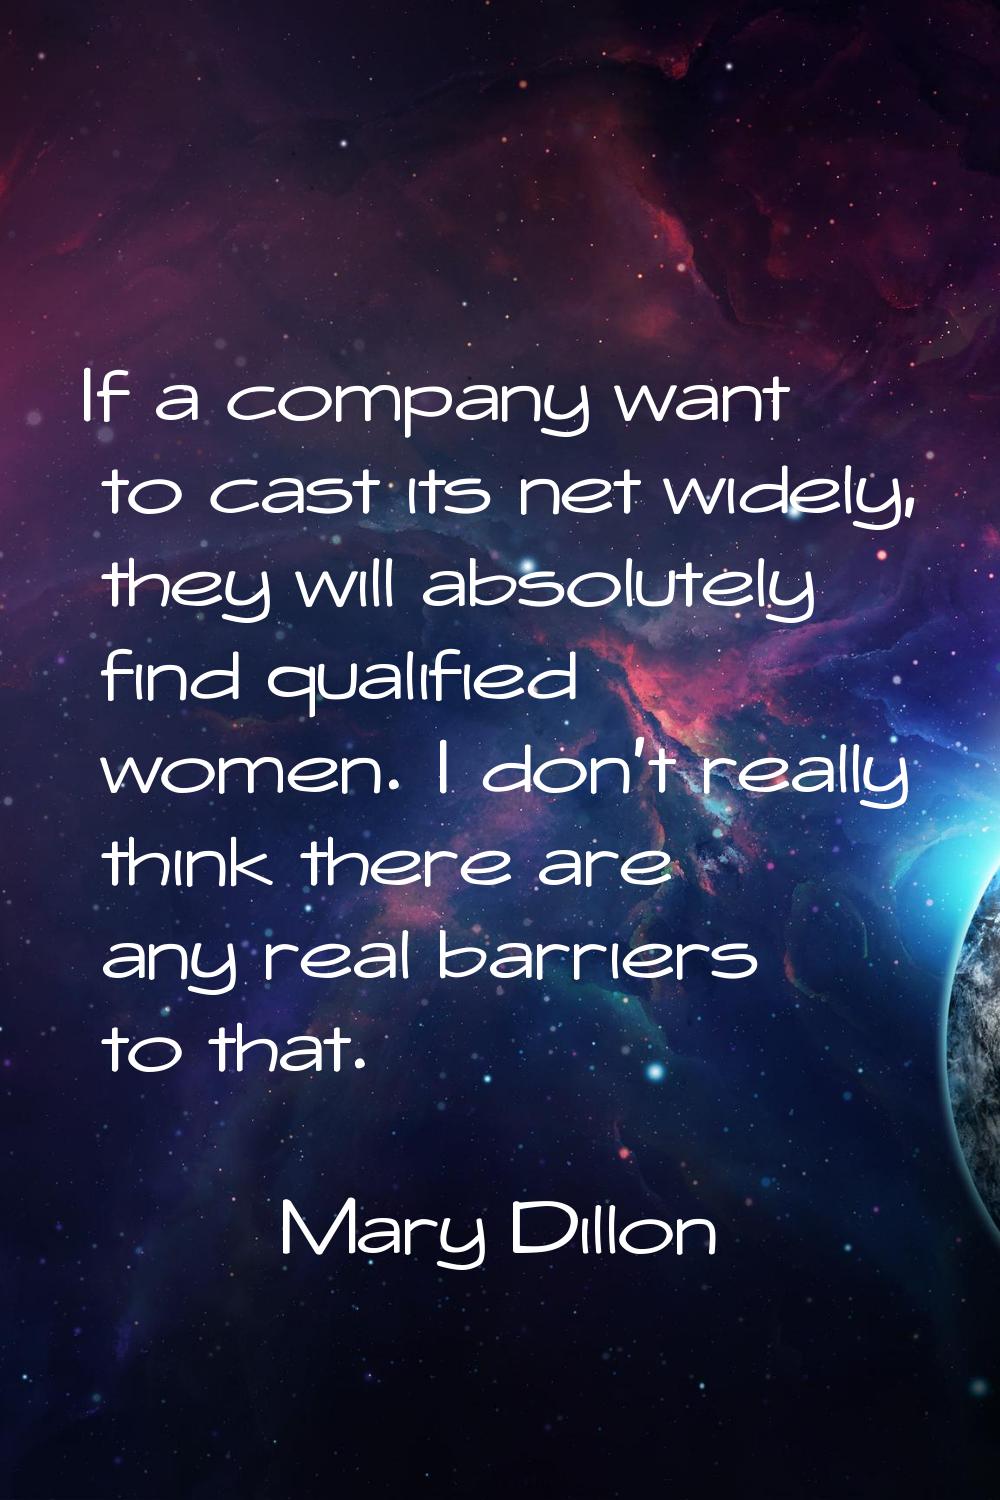 If a company want to cast its net widely, they will absolutely find qualified women. I don't really